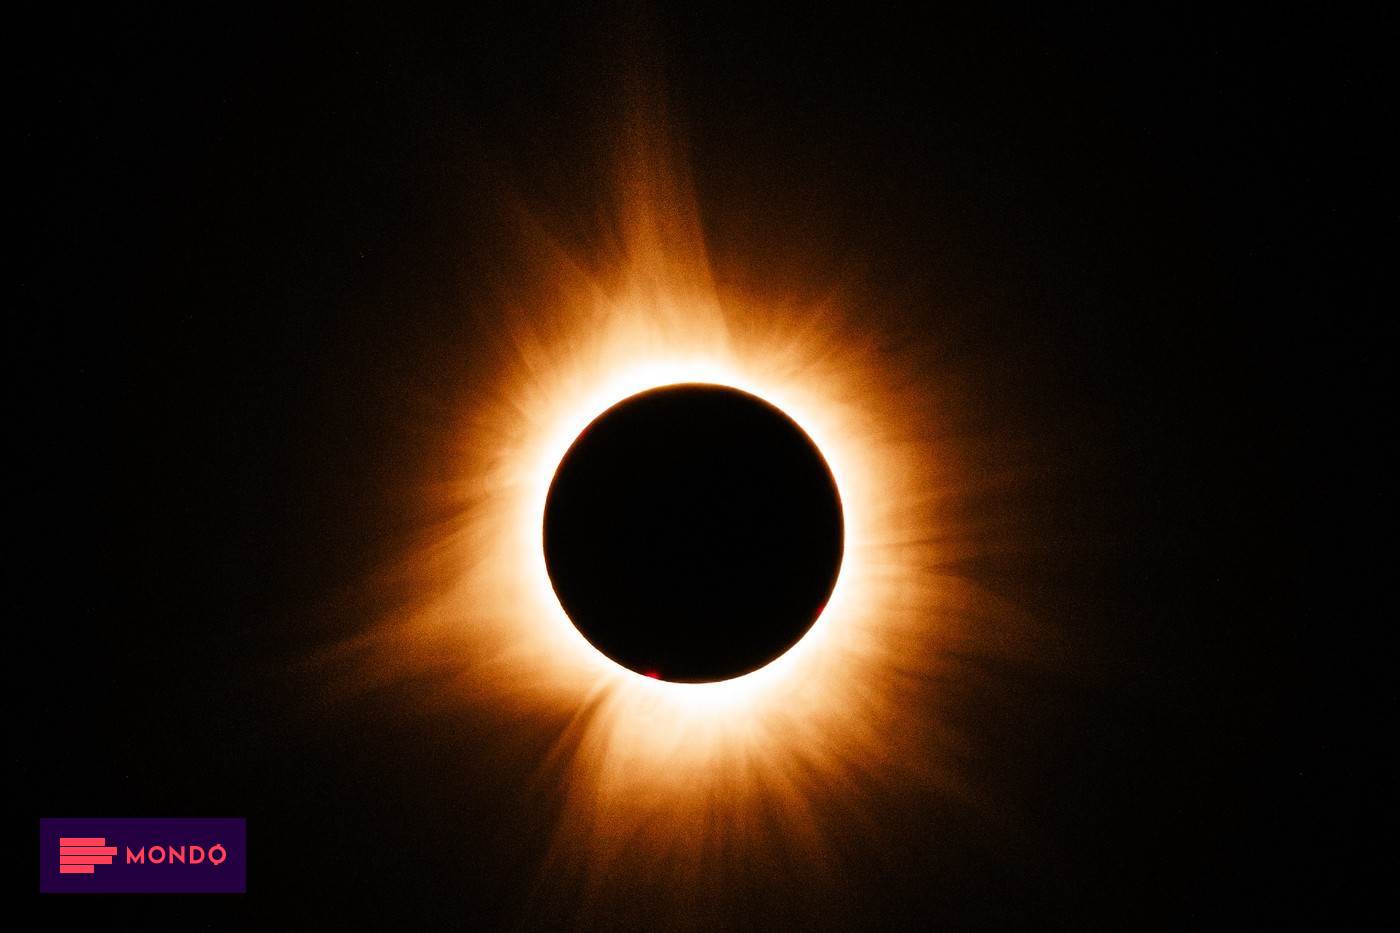 Planned first artificial solar eclipse |  Info